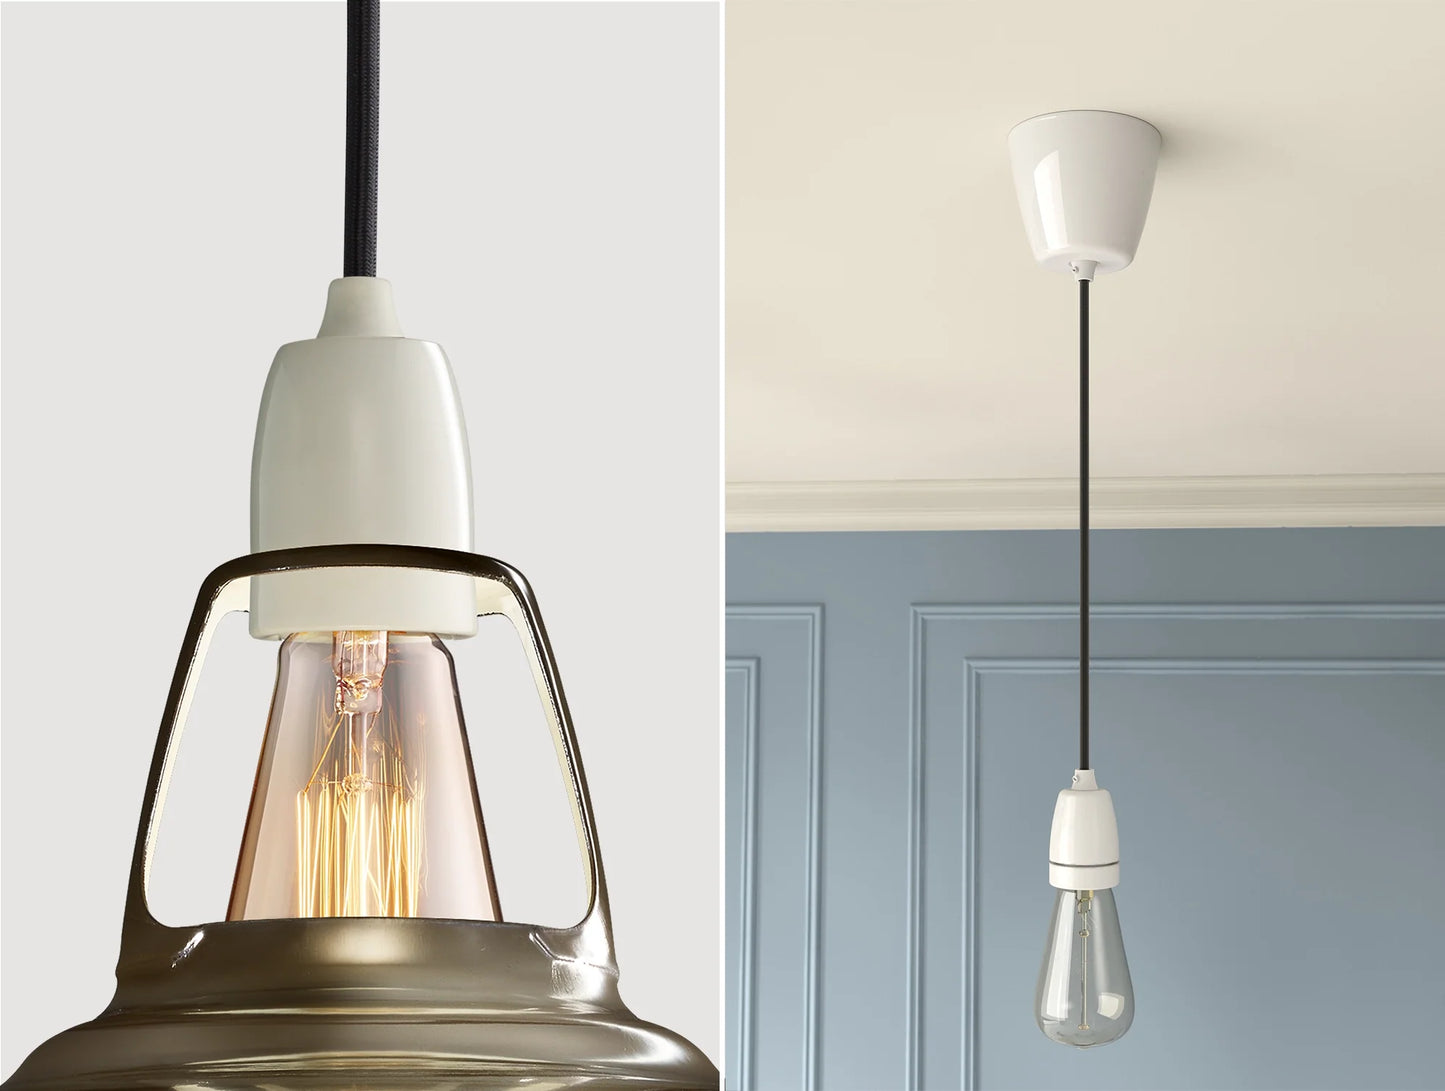 Close up of an E27 Porcelain suspension set on an Antinium shade on the left. On the right, an E27 Porcelain pendant set with a lightbulb is hanging from the ceiling